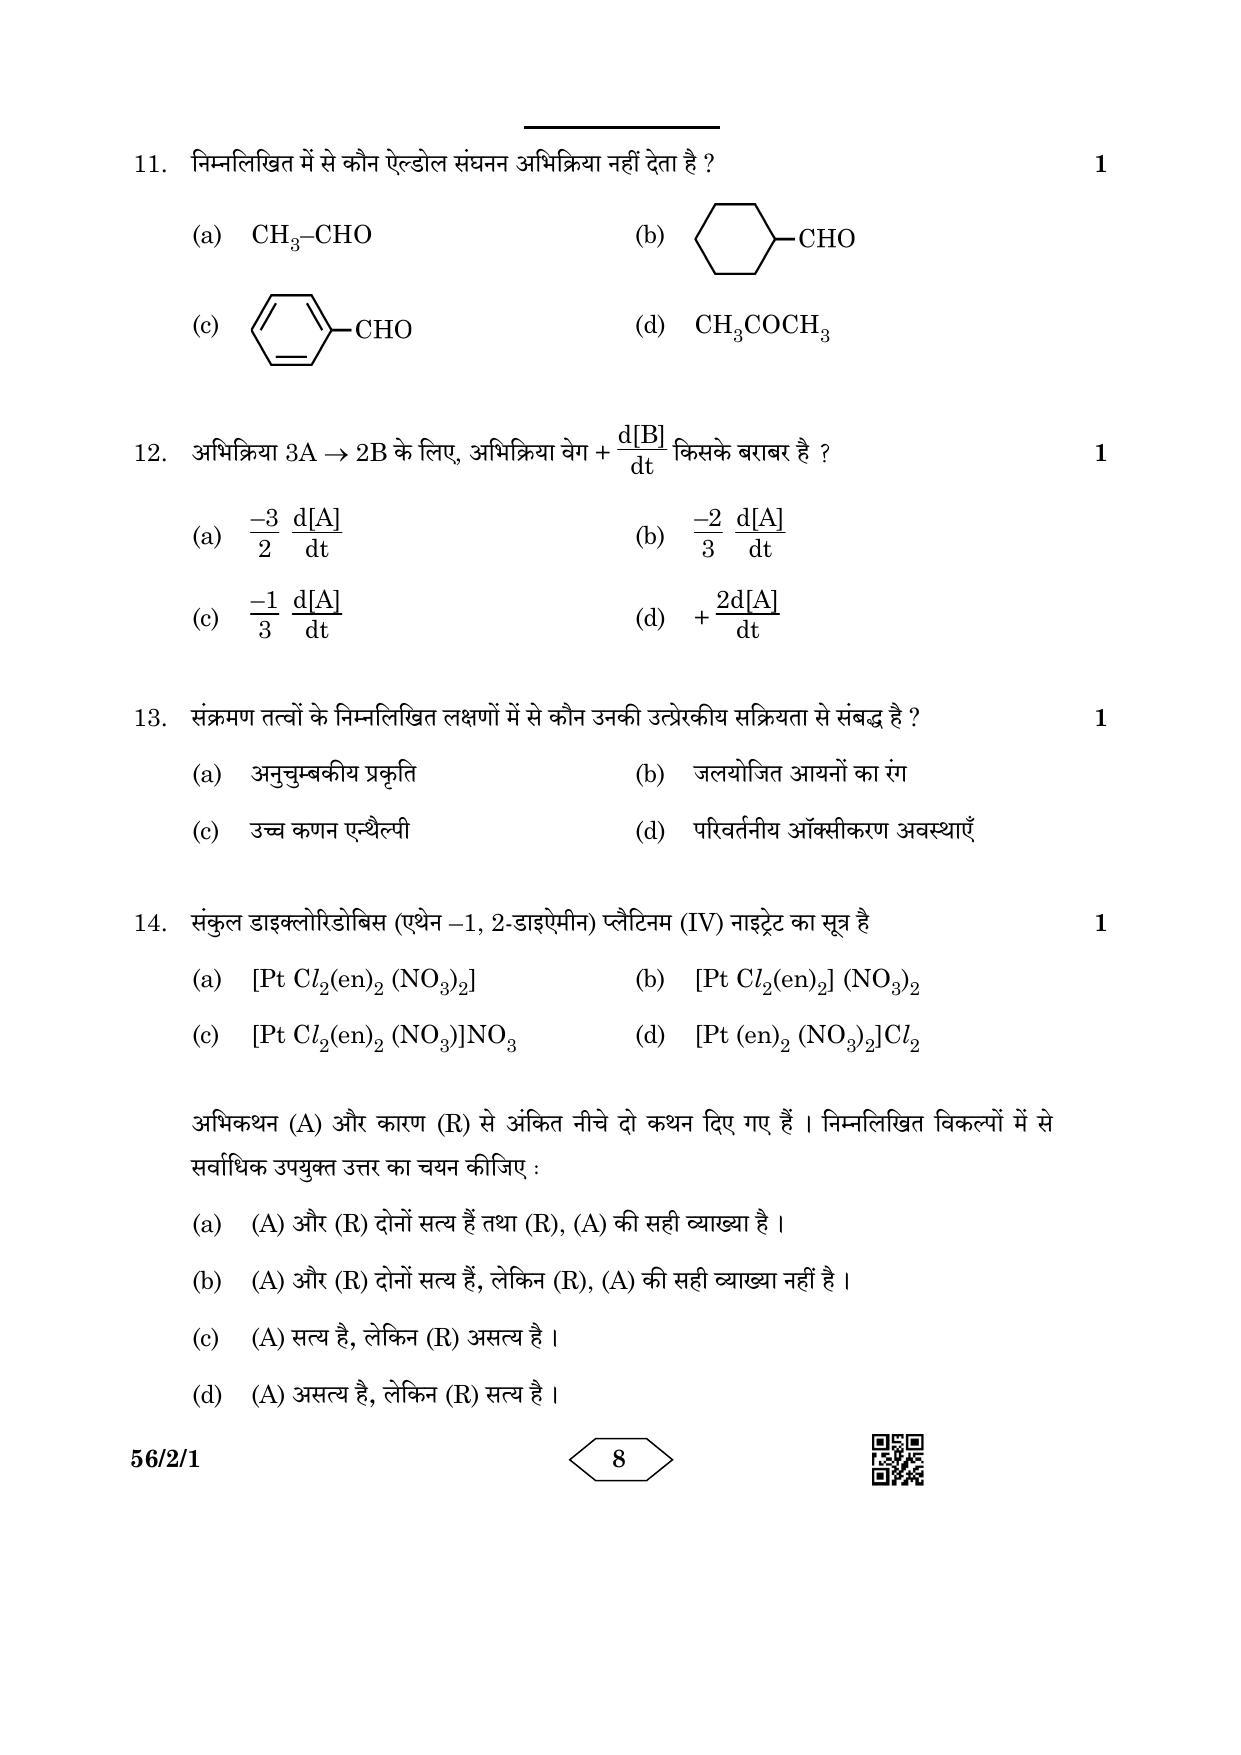 CBSE Class 12 56-2-1 Chemistry 2023 Question Paper - Page 8